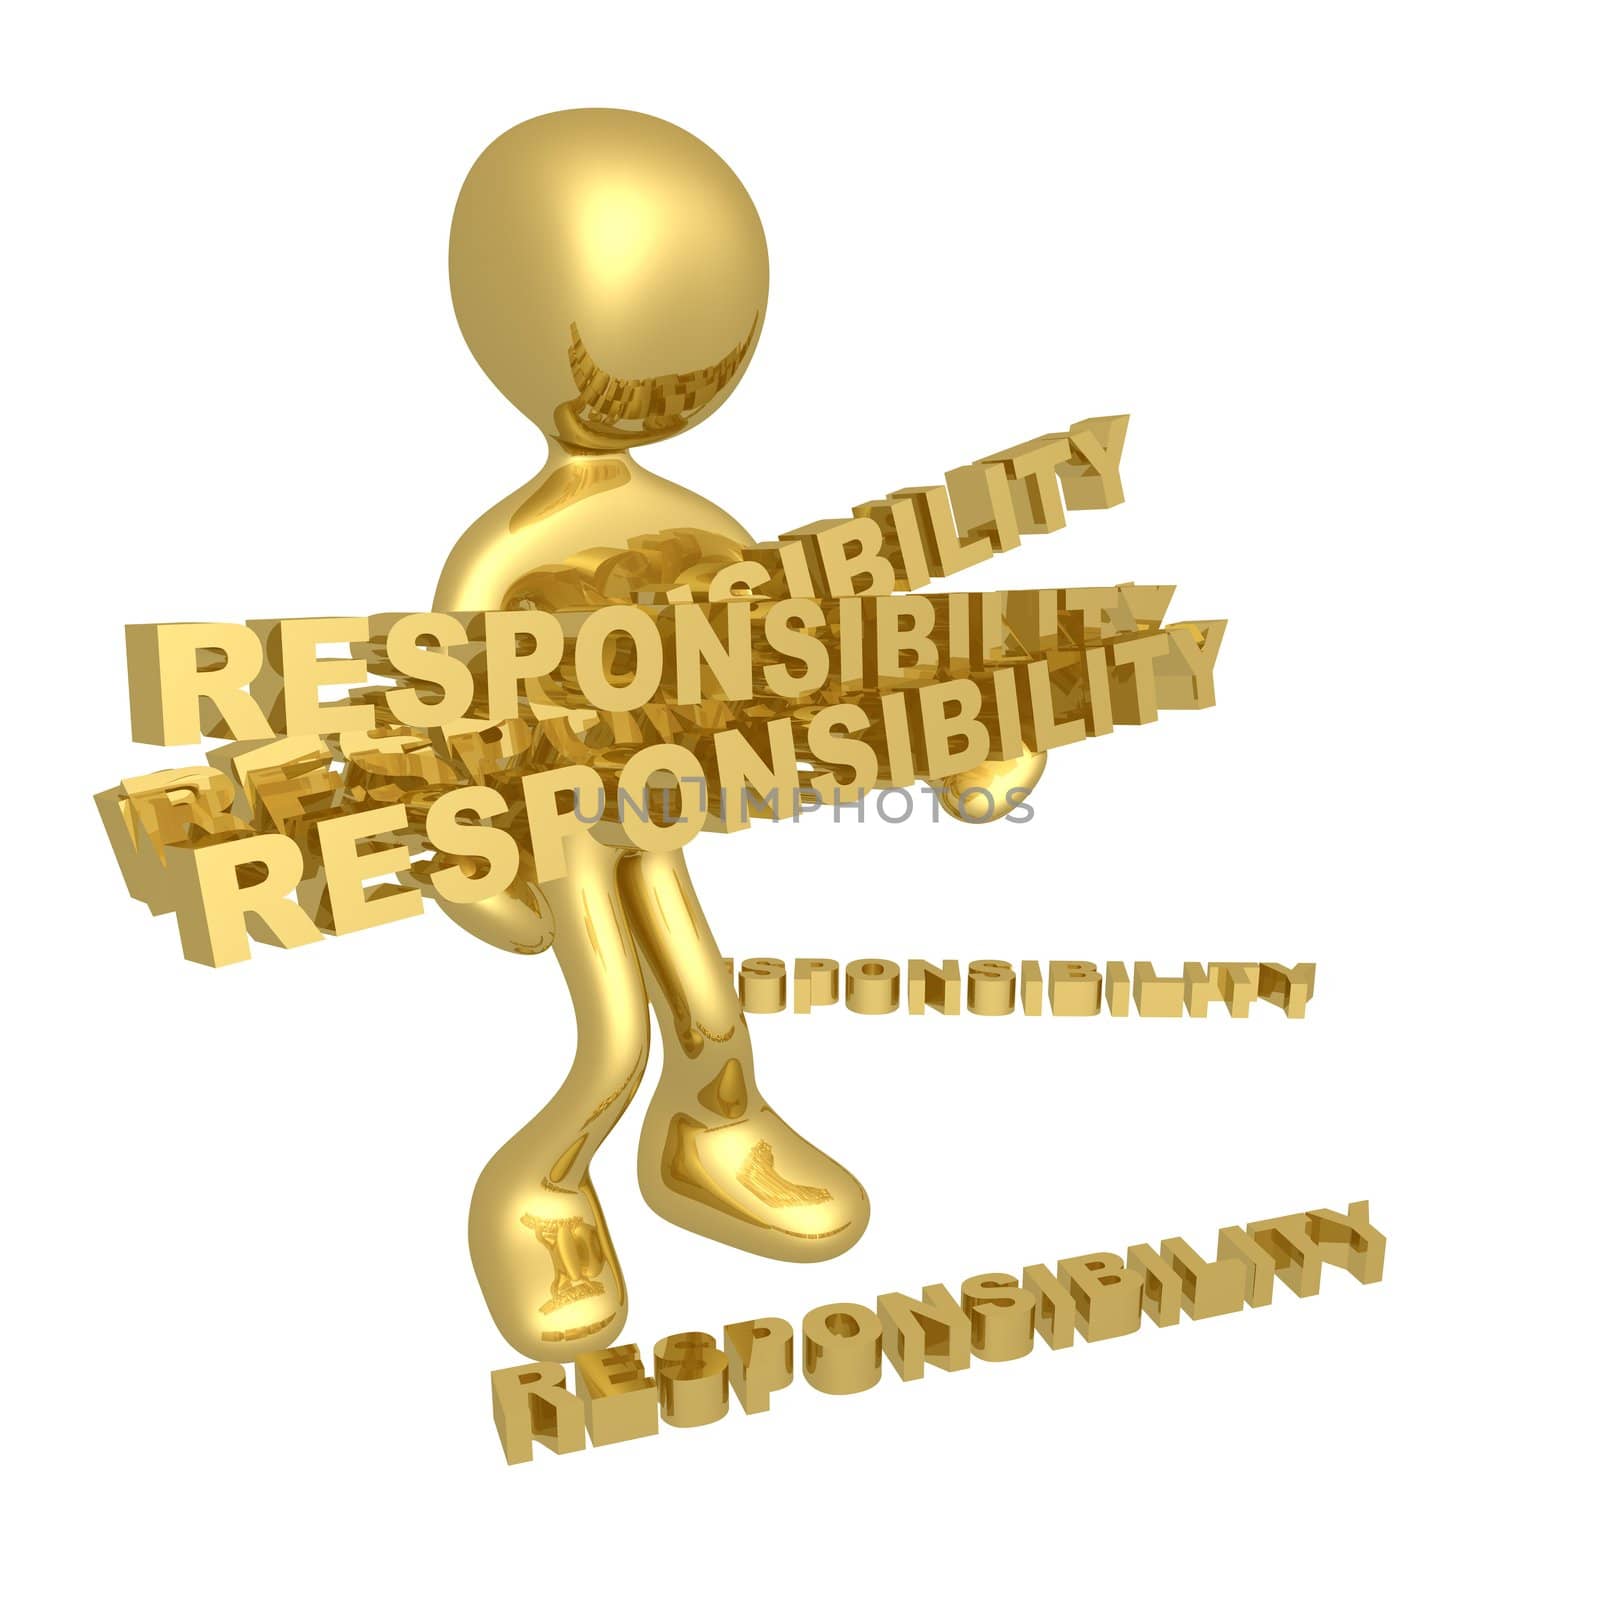 Lots of responsibilities by 3pod